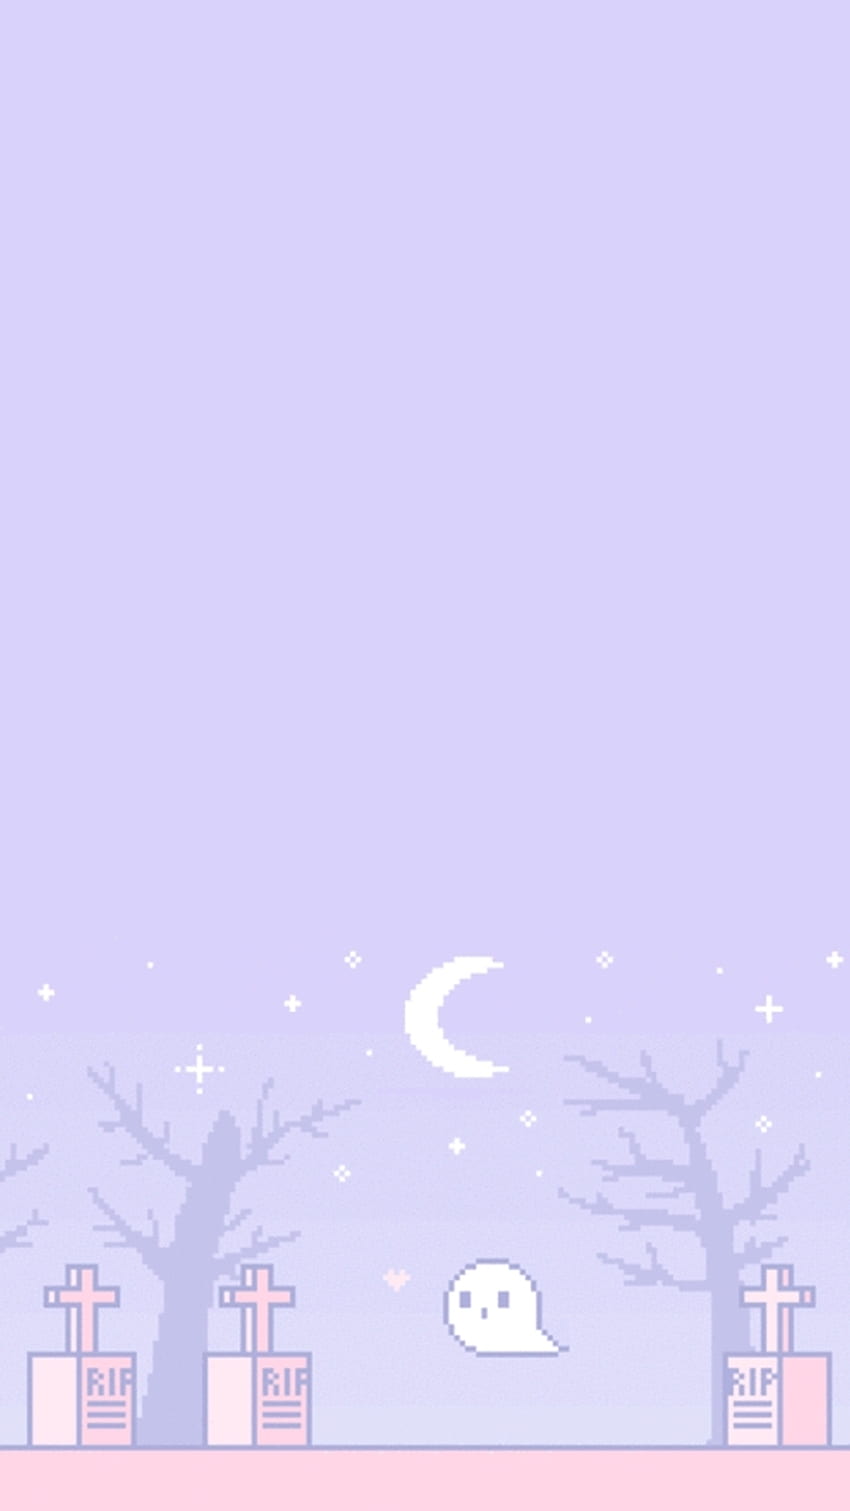 Pin By Amber On Pixel In 2019 Goth Aesthetic Pastel Ghosts Cute Than You In 2019 in 2020. Background tumblr pastel, Goth , Cute pastel, Cute Gothic wallpaper ponsel HD